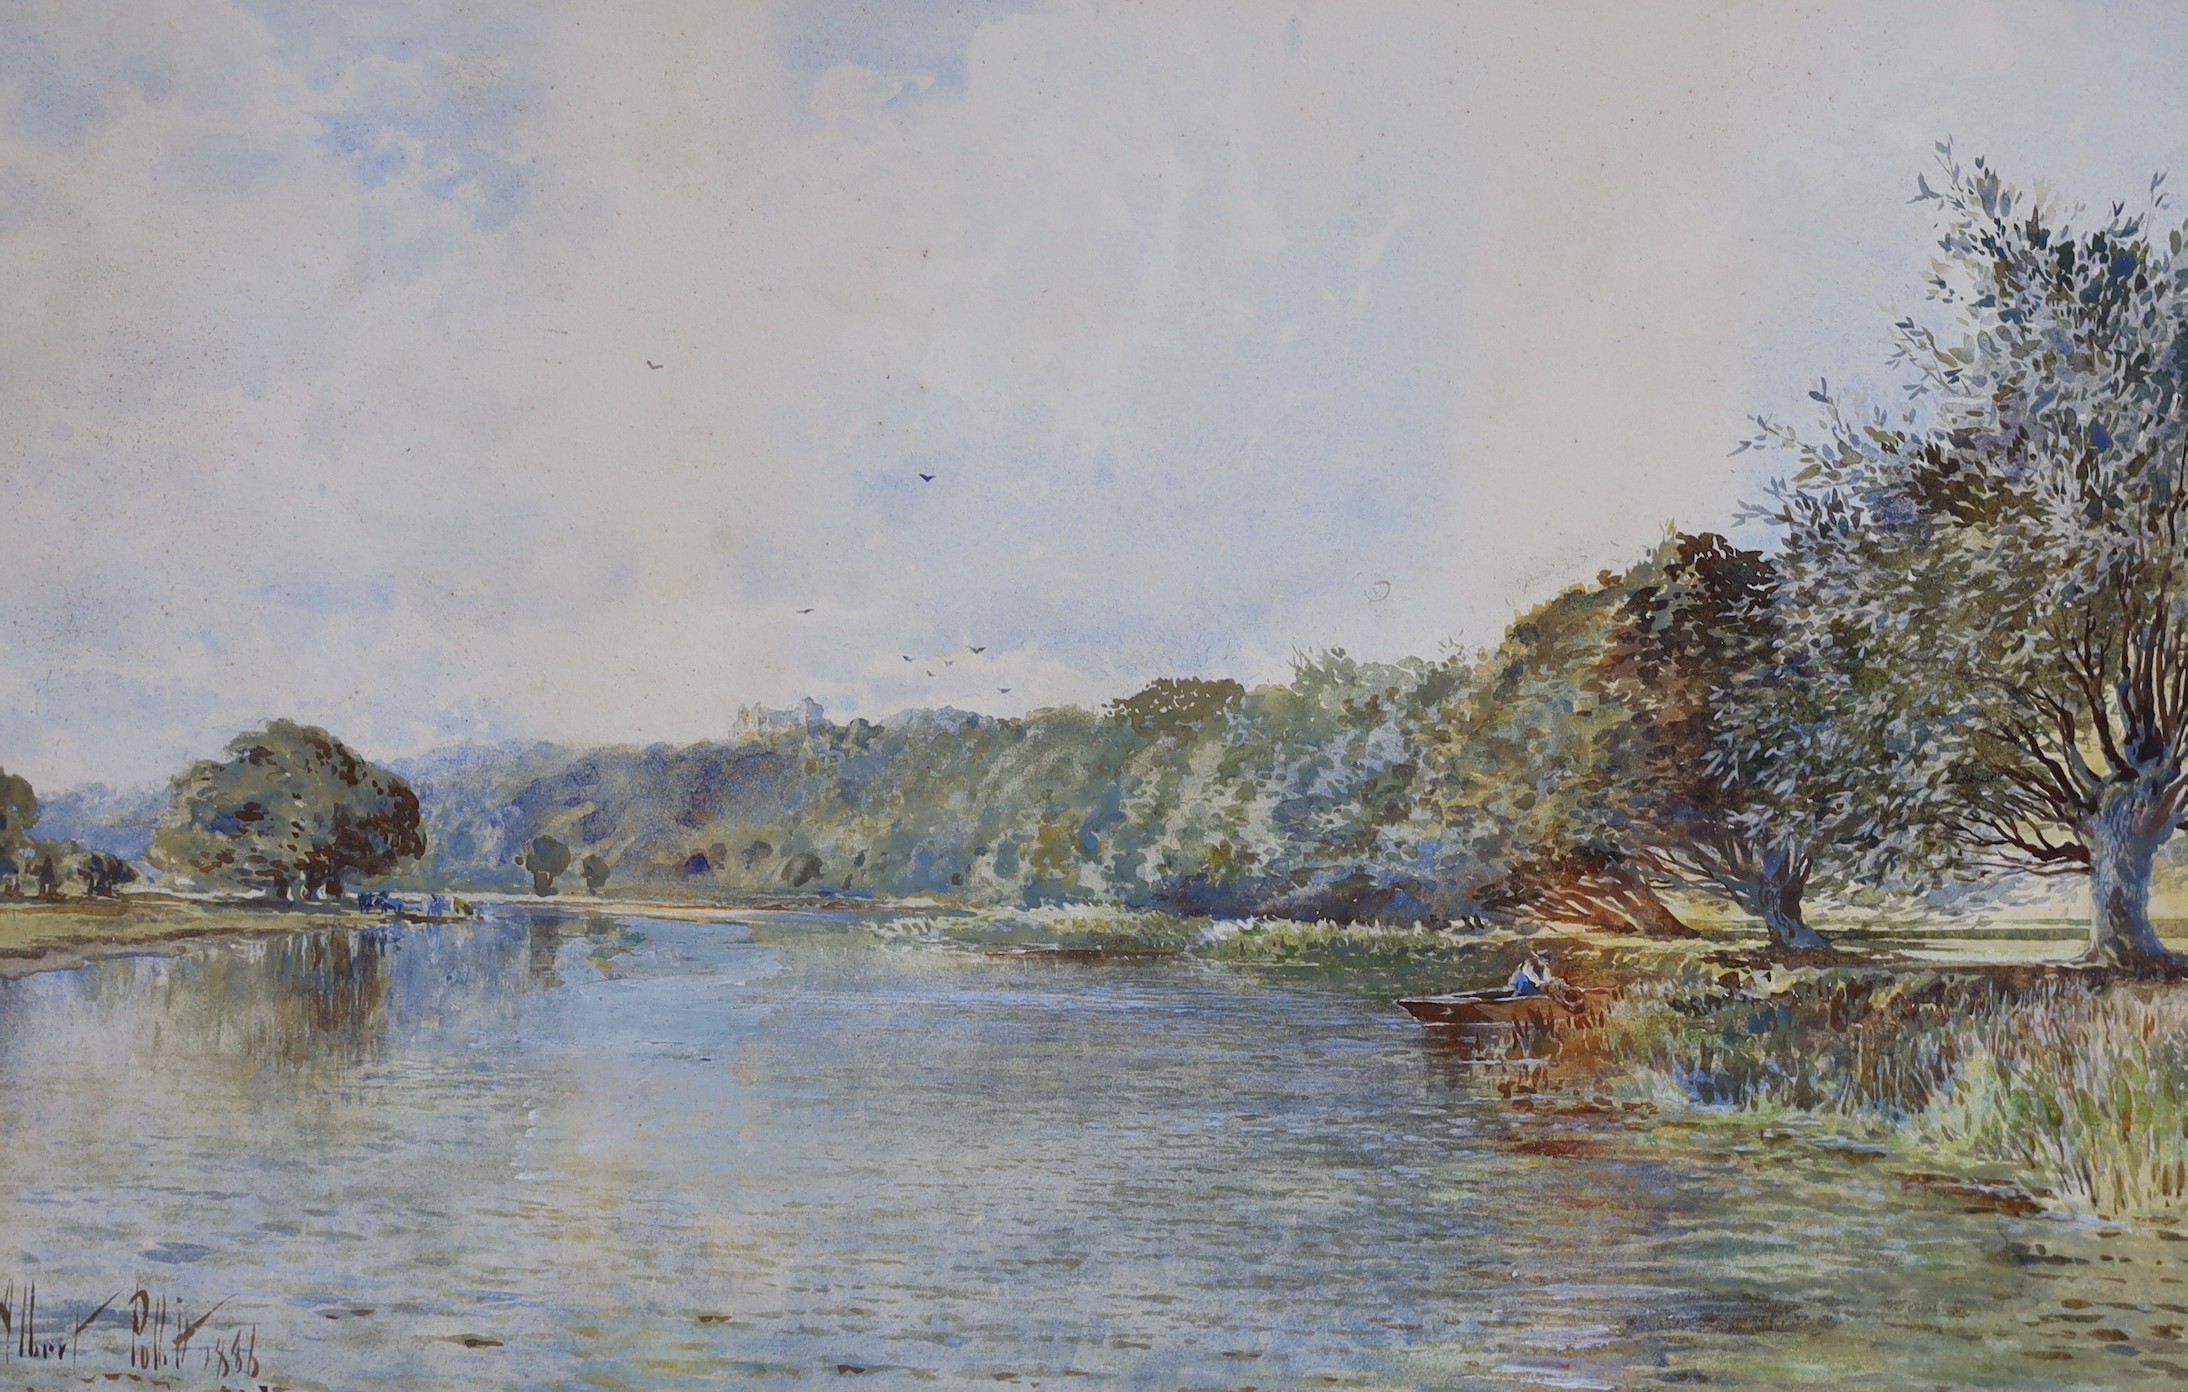 Albert Pollitt (1856-1926), watercolour, 'Prudhoe Castle in the Tyne', signed and dated 1886, 28 x 44cm